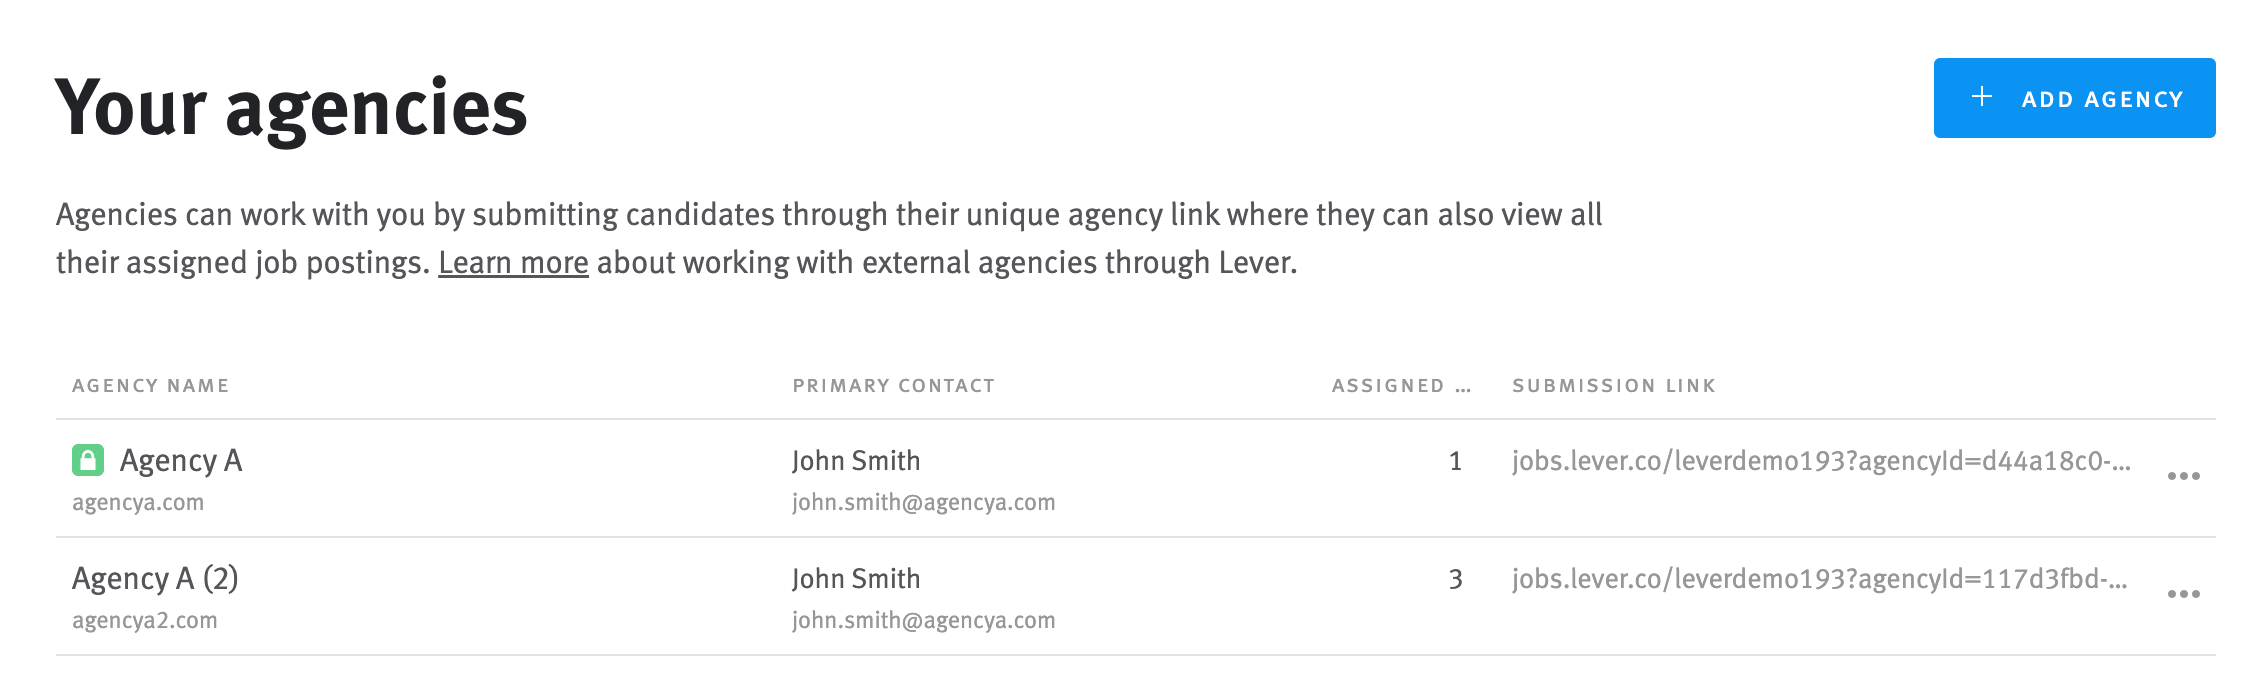 Agencies list with Agency A and Agency A(2) listed. Agency A has a confidential posting assigned.